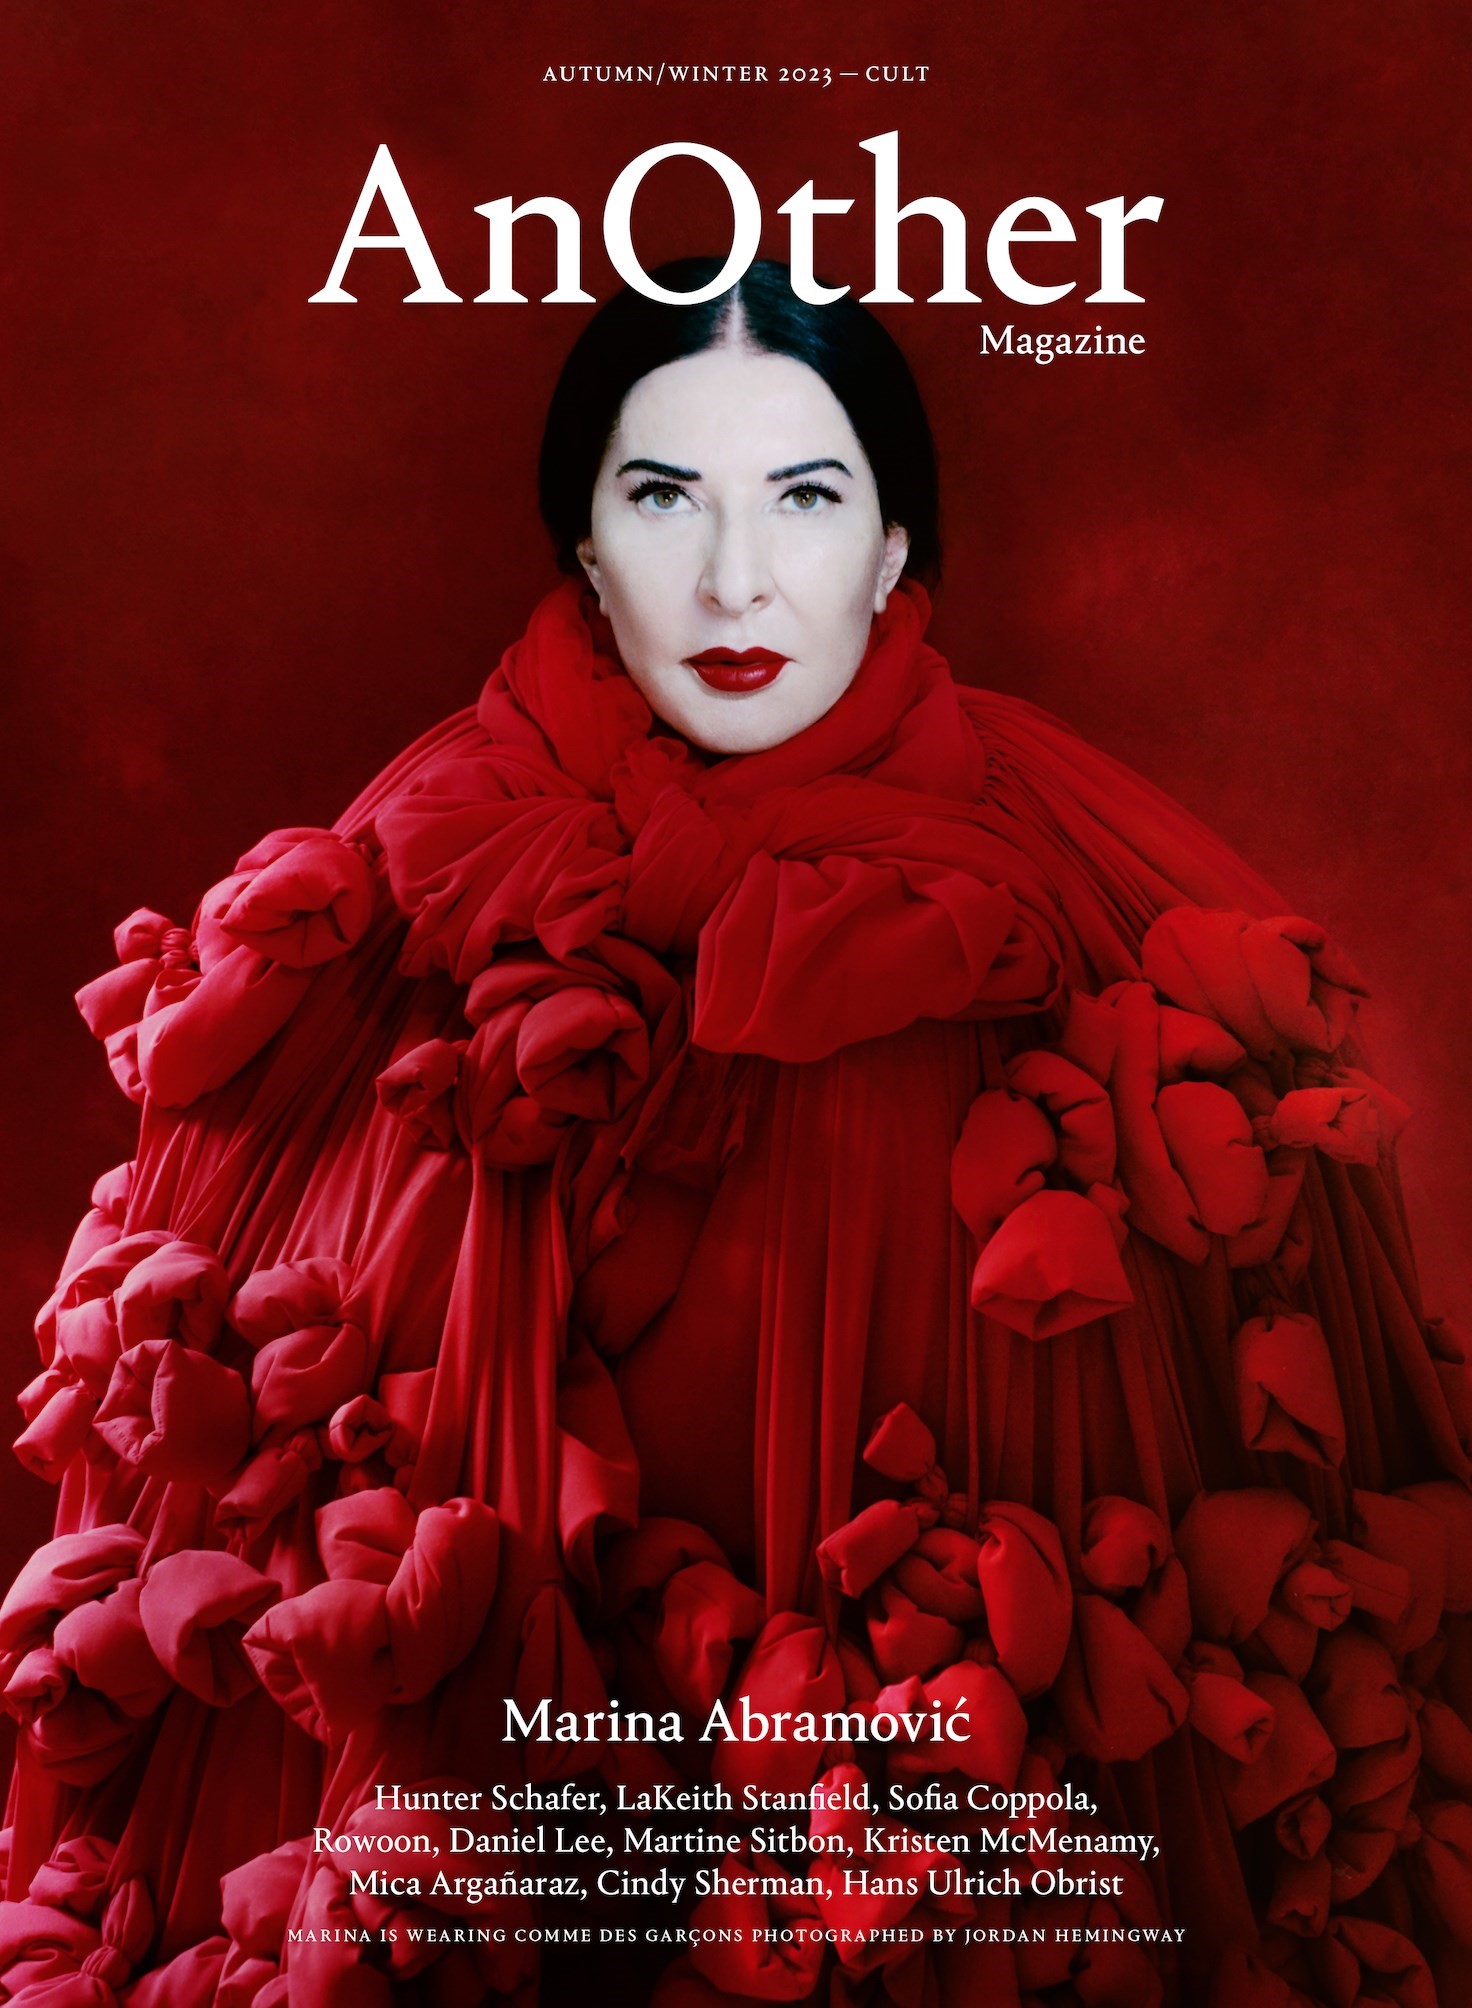 Marina Abramovic for AnOther Autumn/Winter 2023